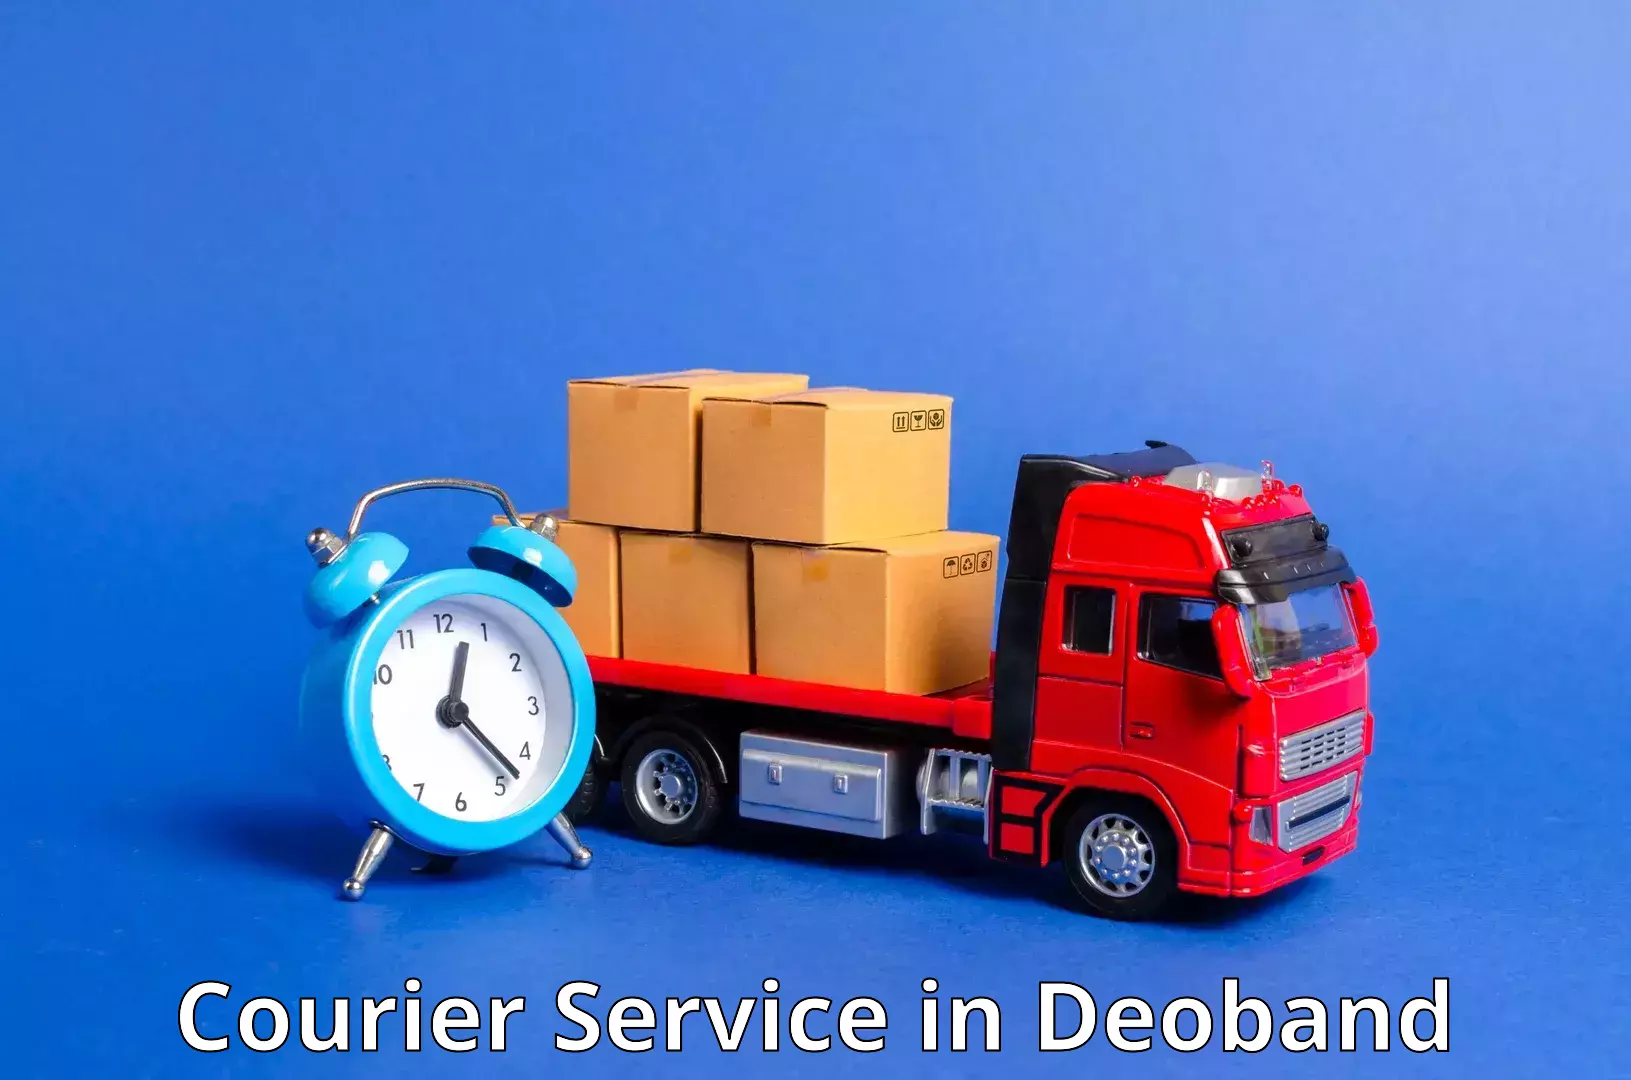 Business delivery service in Deoband